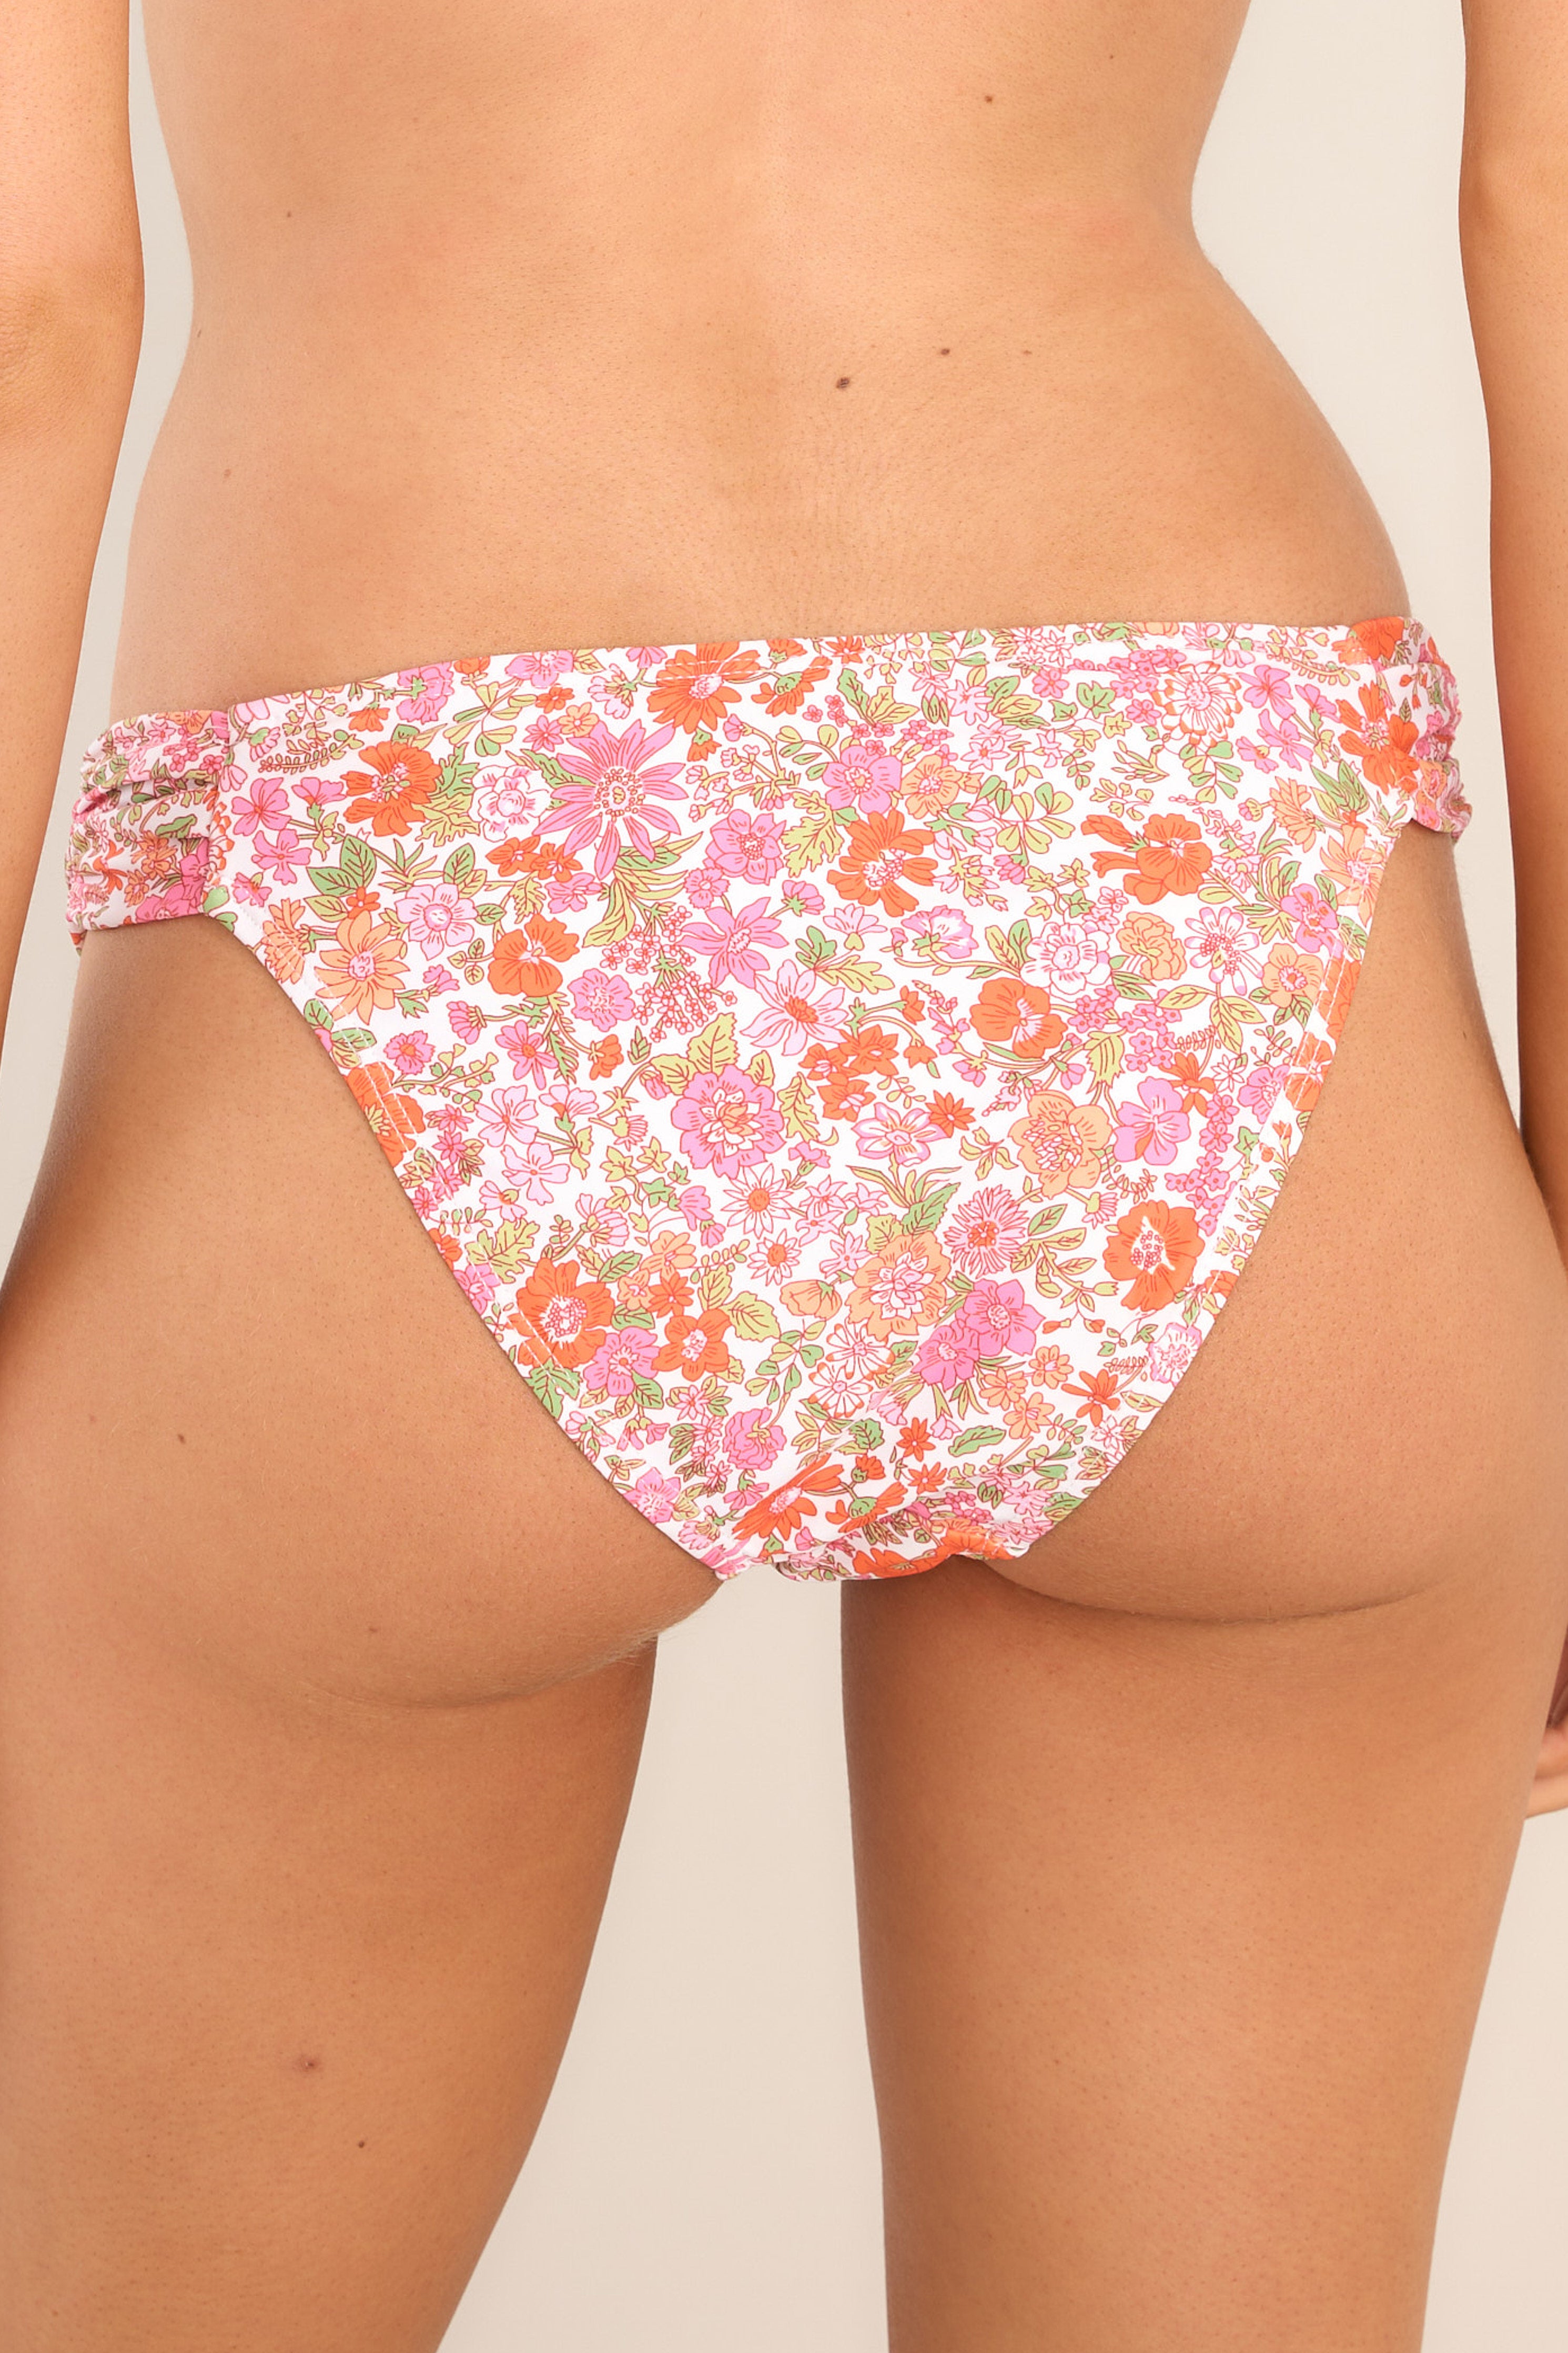 Back view of these bikini bottoms that feature a low rise design, cinched hip detailing, and a slightly cheeky backside.